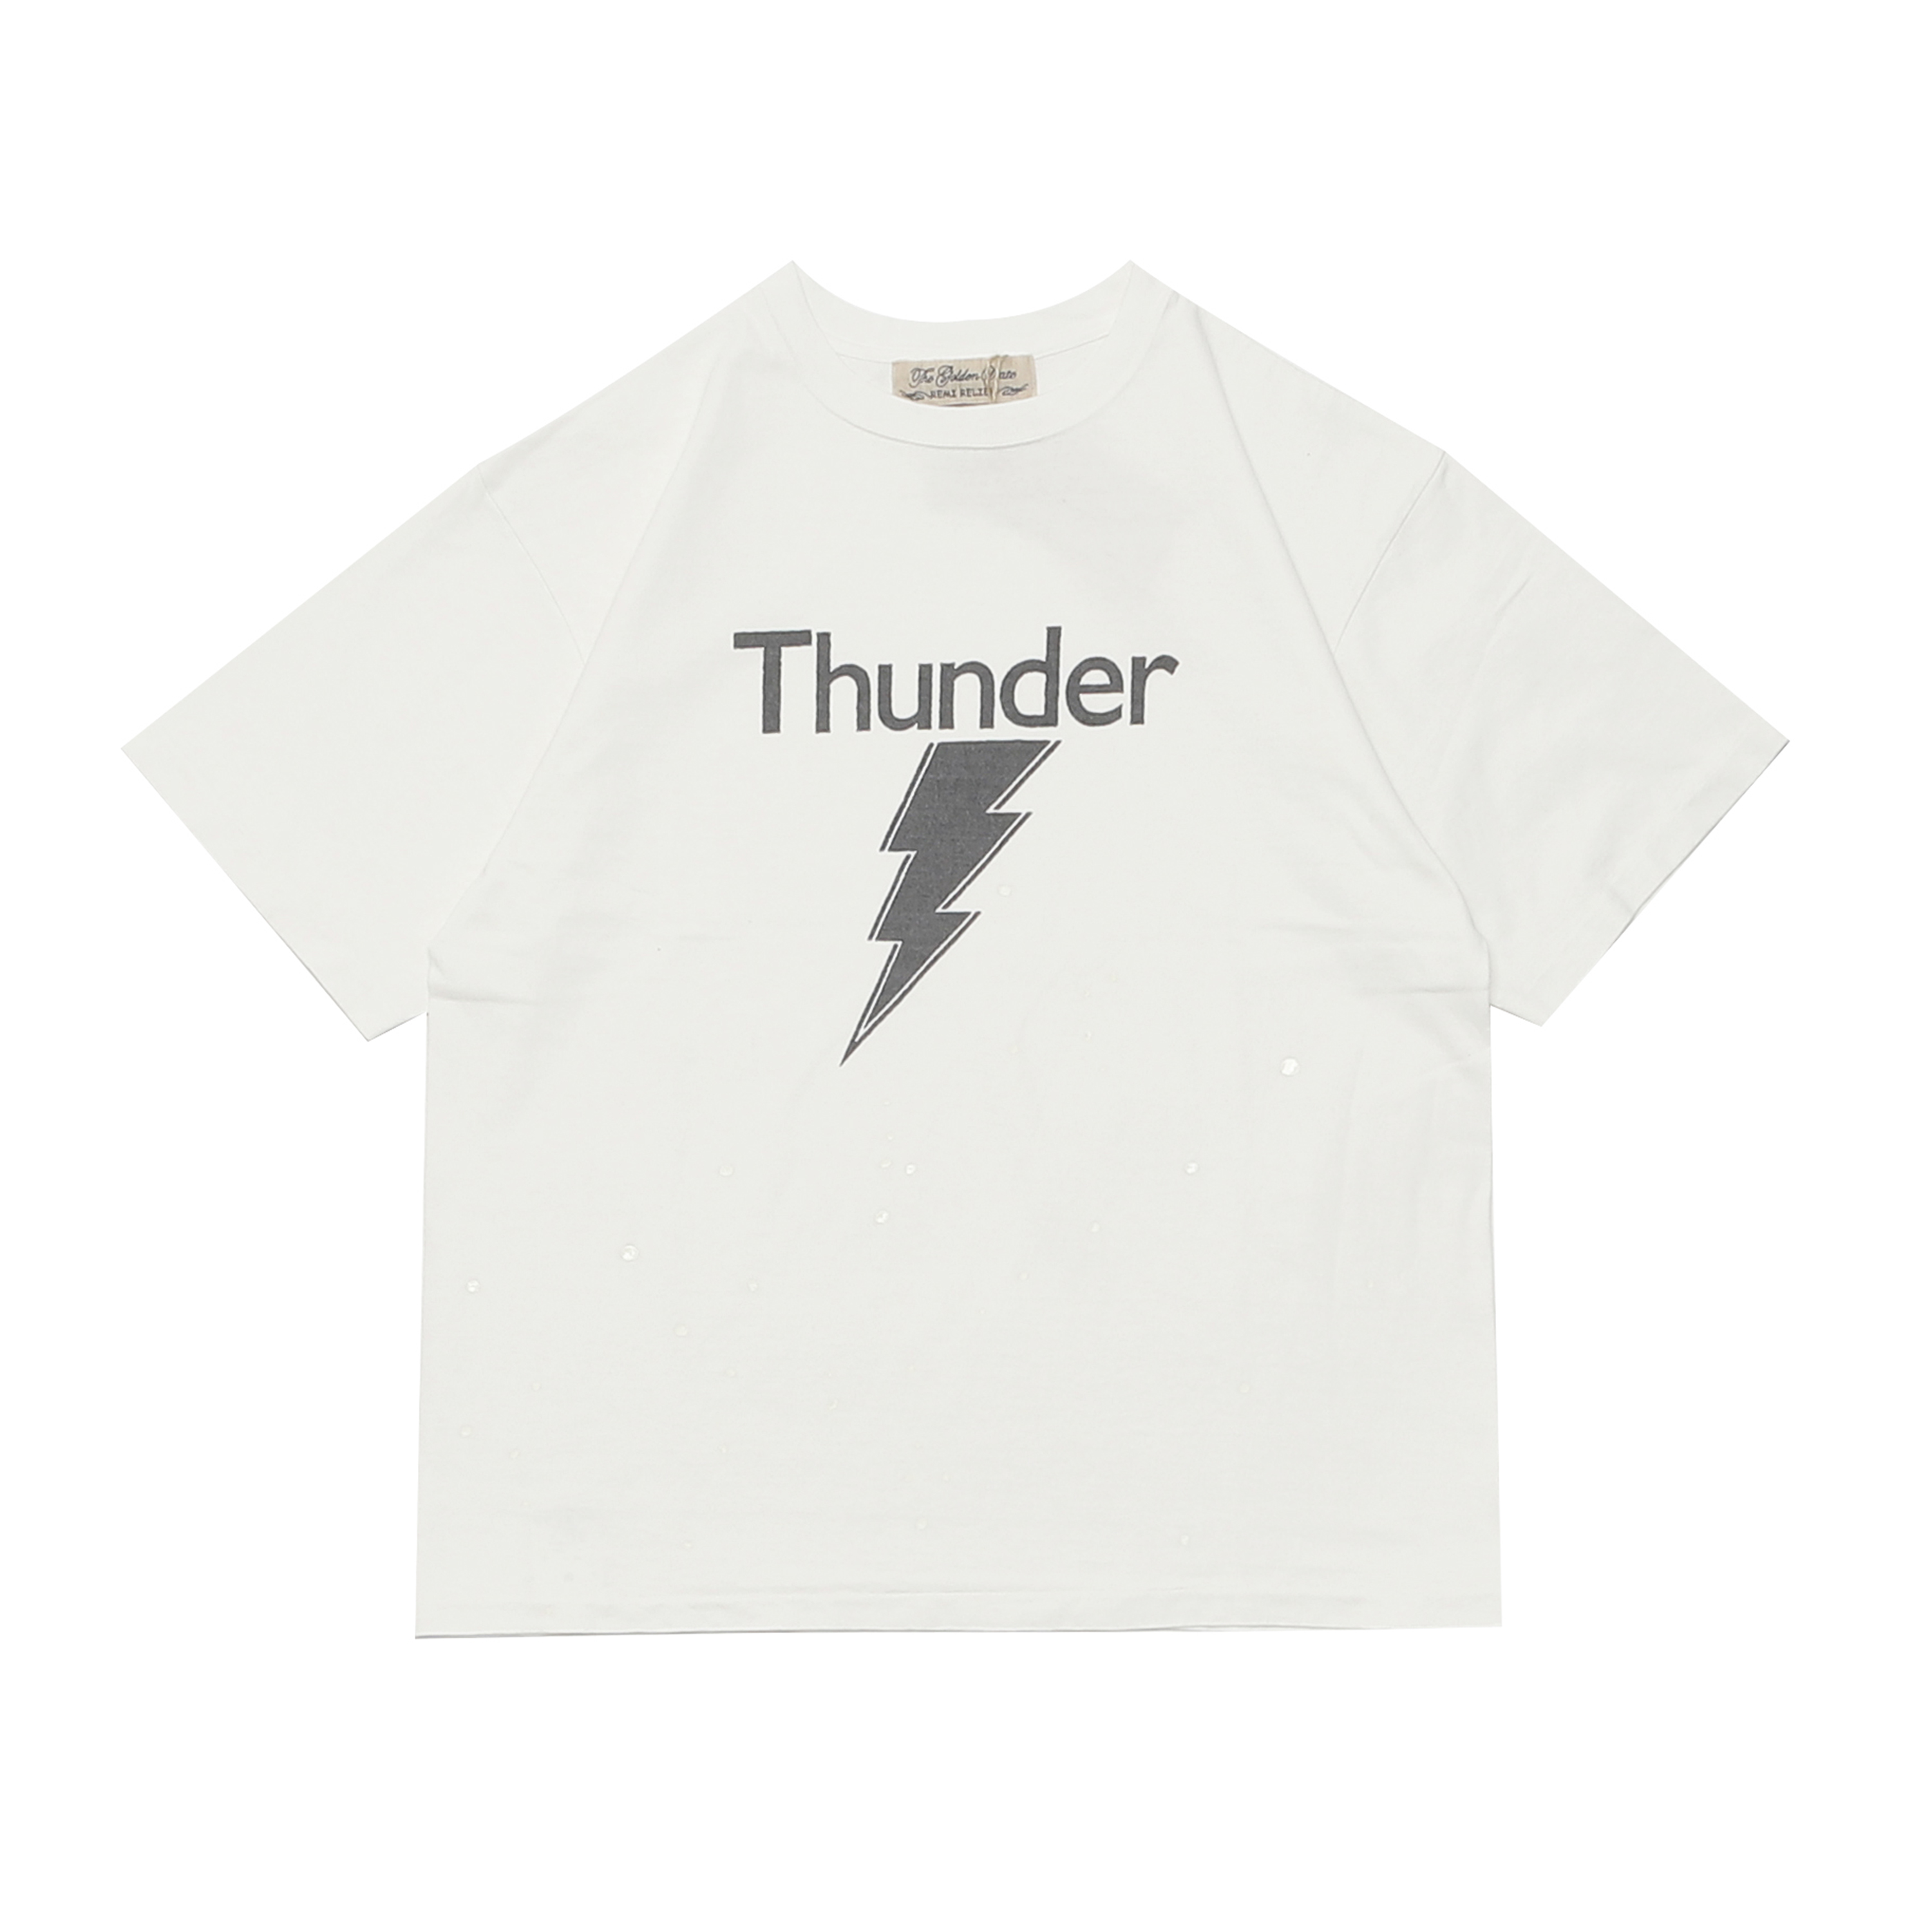 SIDE SEAMLESS JERSEY S/S TEE WITH NEW FINISH - THUNDER OFF WHITE